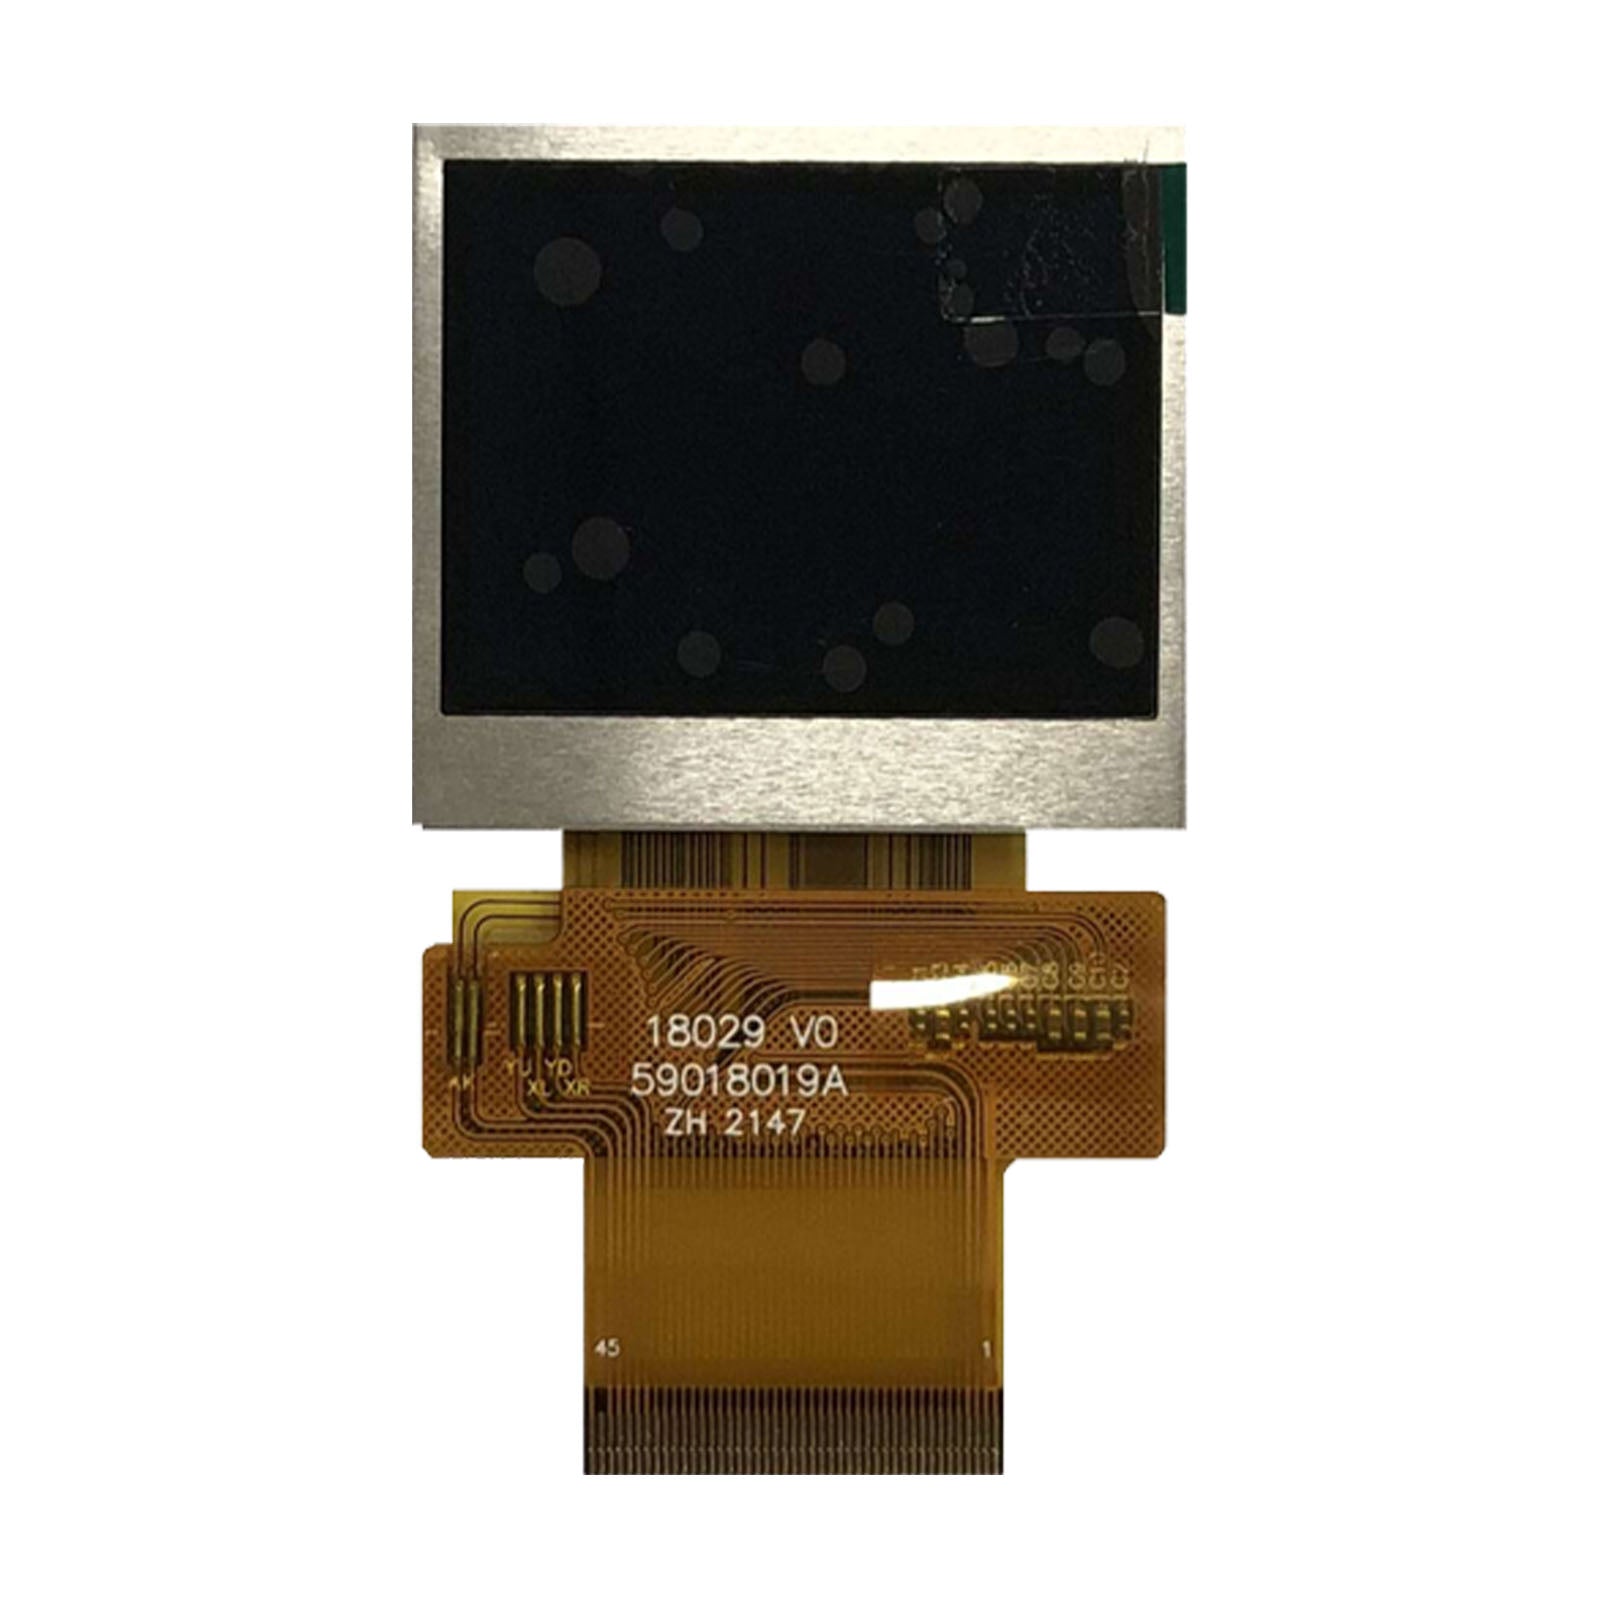 1.75-inch TFT Transflective Display with a resolution of 296 by 220 pixels, compatible with MCU interface